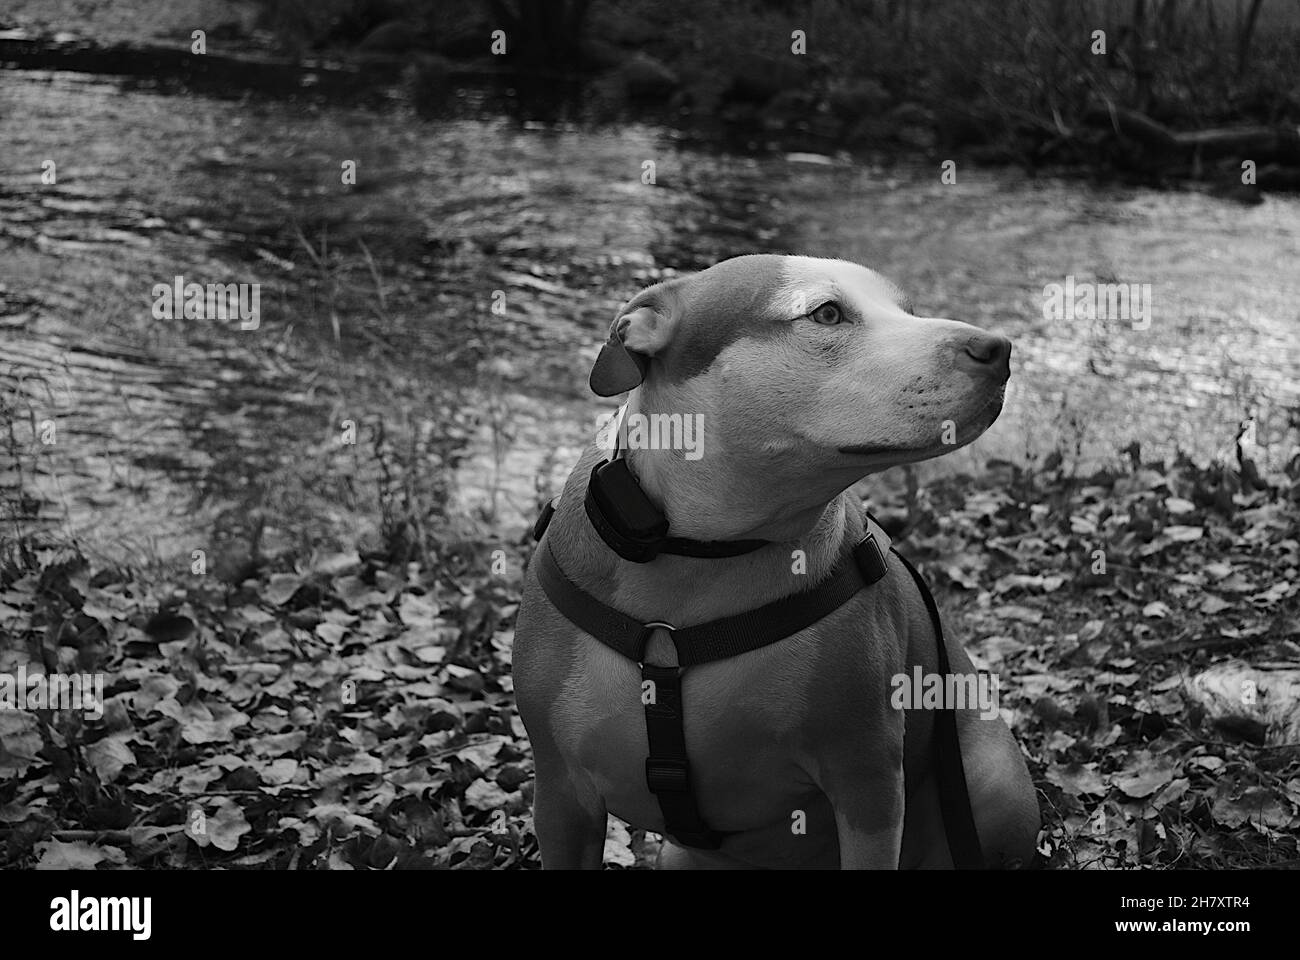 Pit Bull at Pond Stock Photo